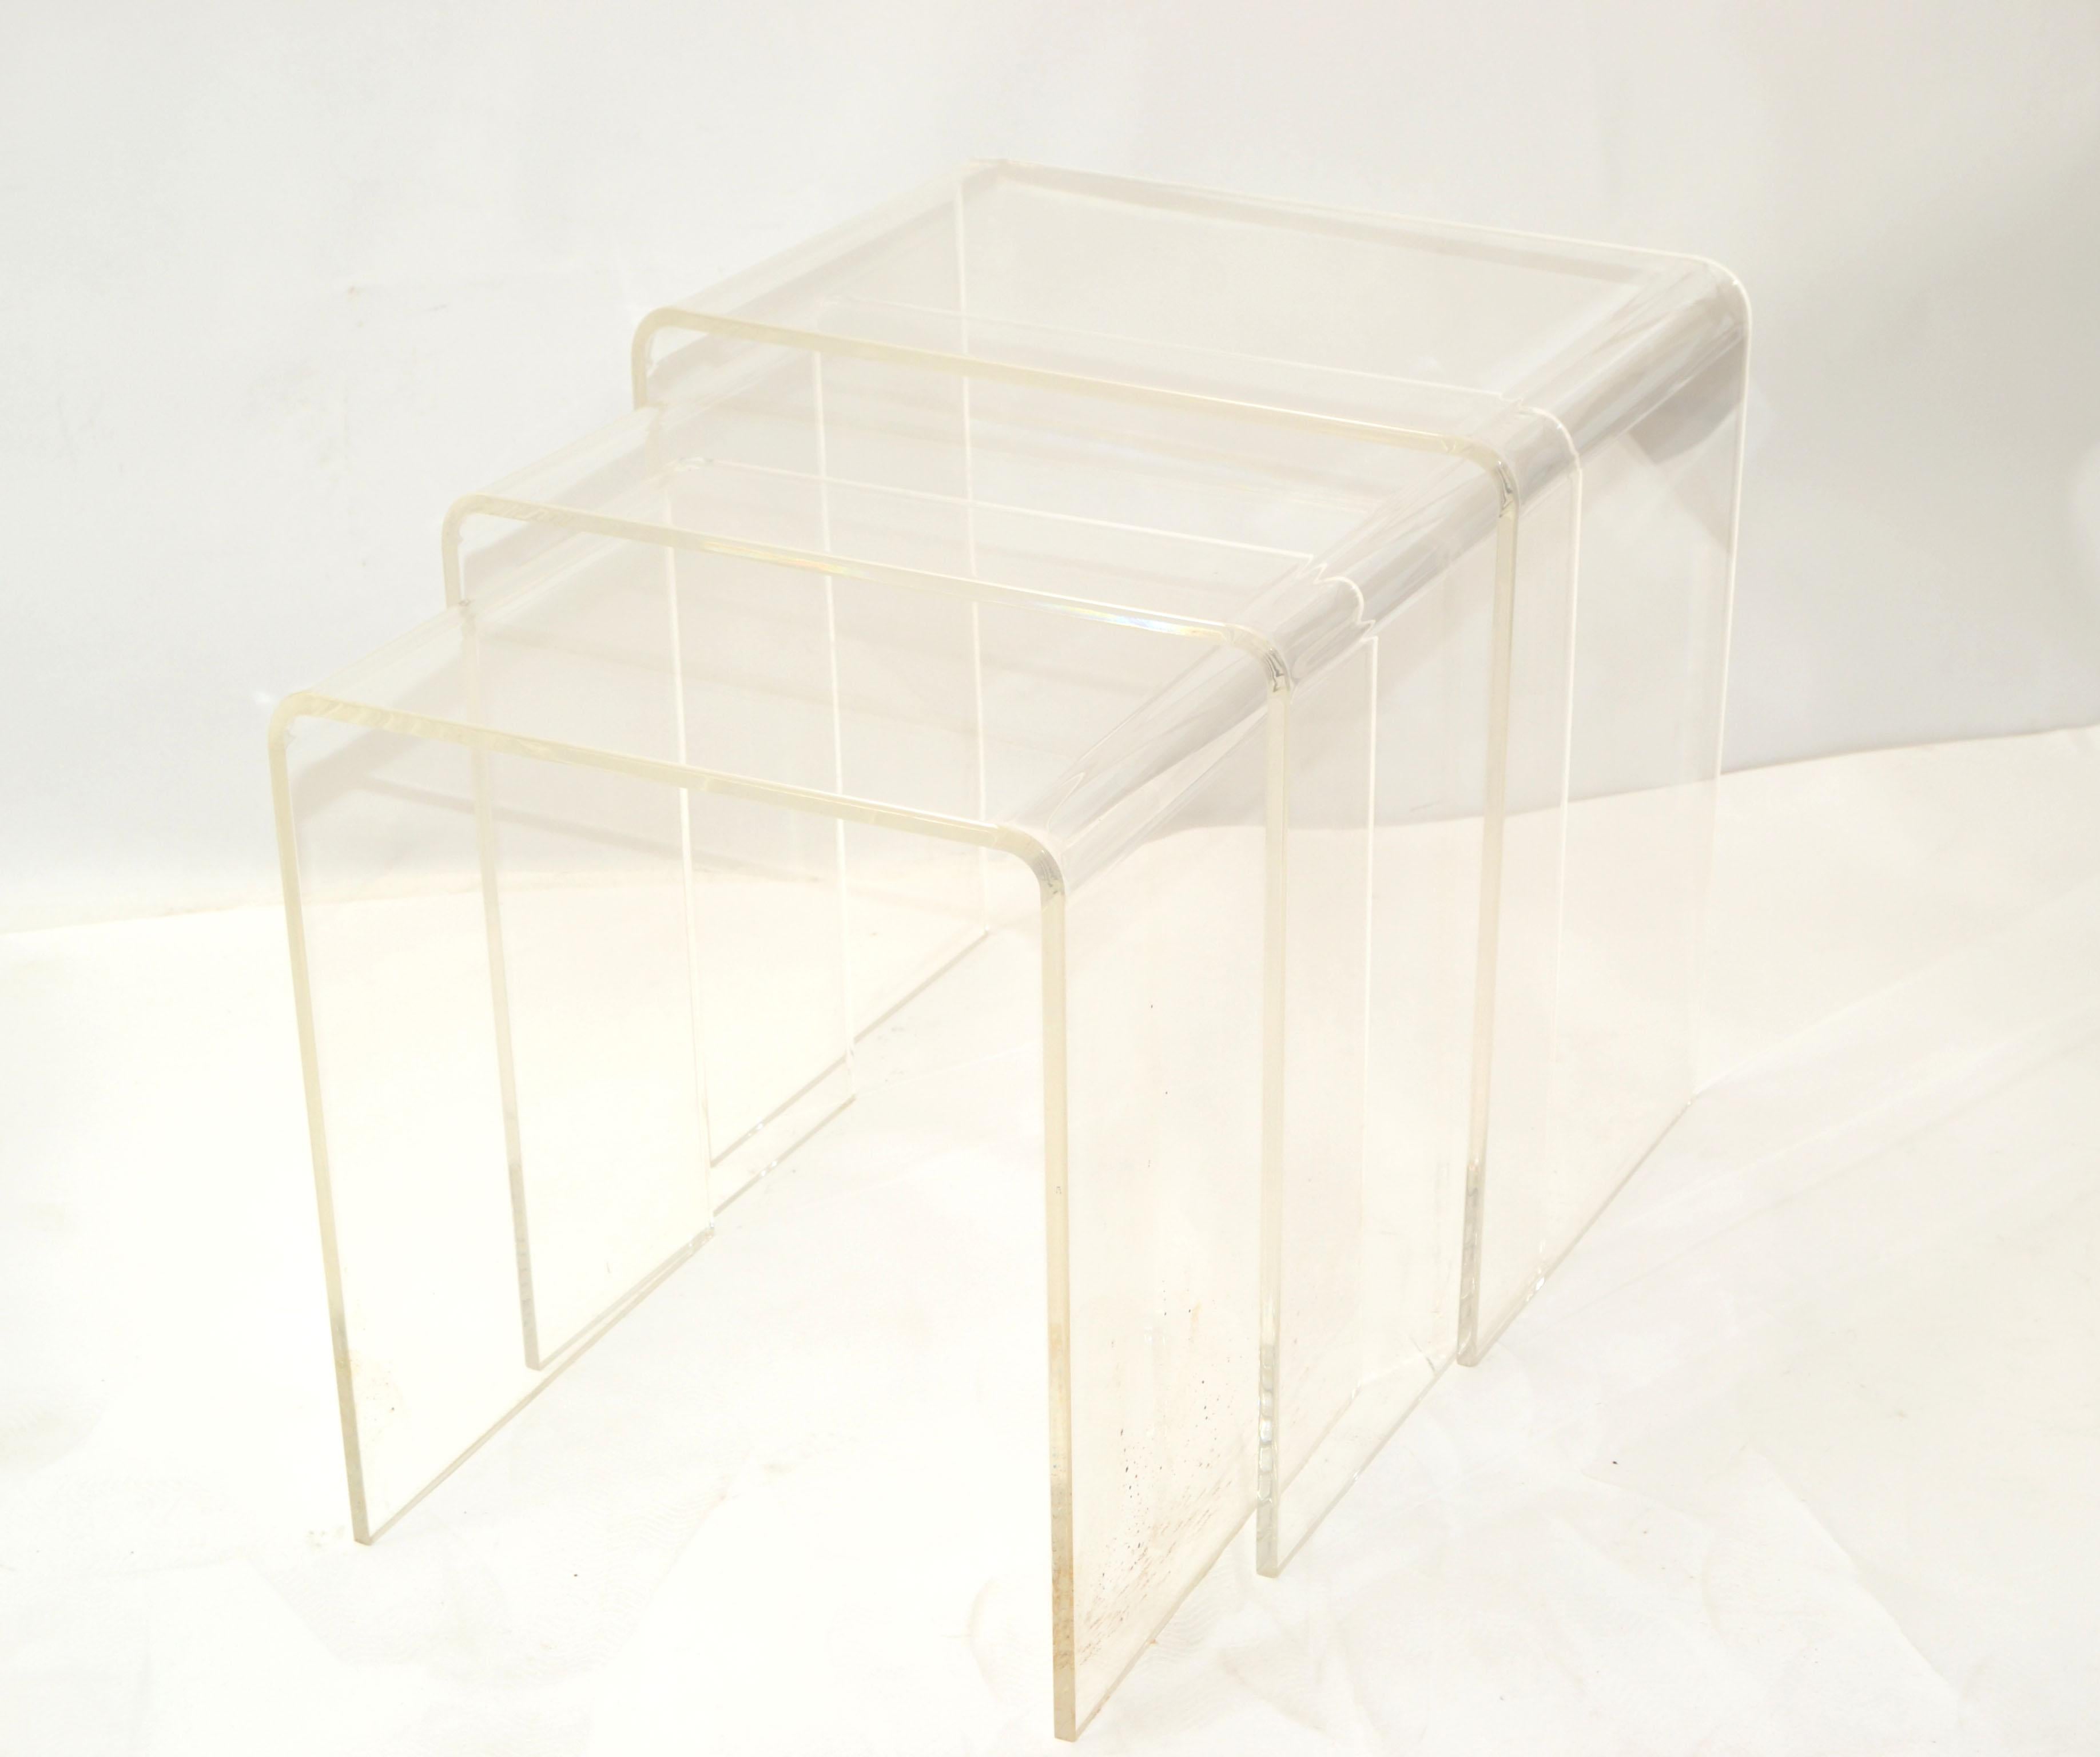 American Pair of Lucite Waterfall Nesting Tables / Stacking Tables, Stools, Set of 3 For Sale